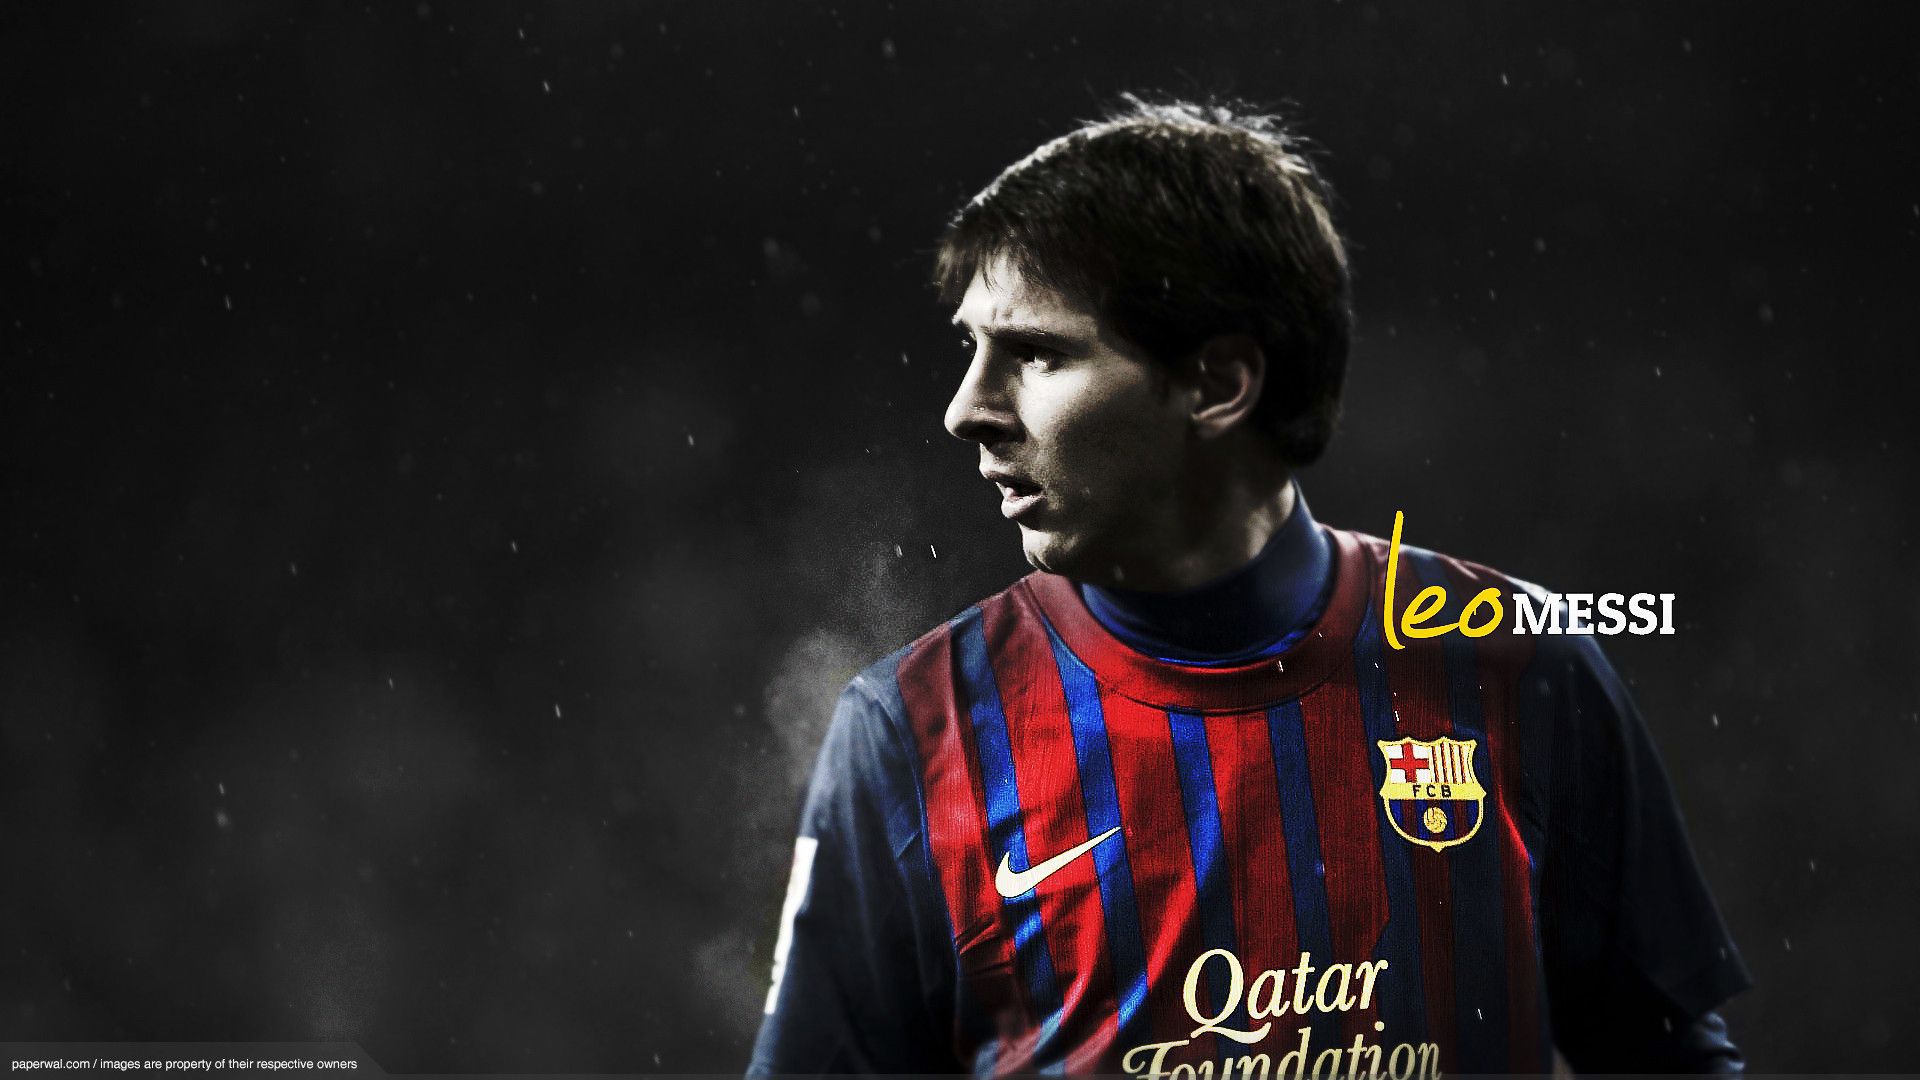 Lionel Messi M10 Wallpapers HD Free Download for Desktop [50 pictures] - Art Wallpaper